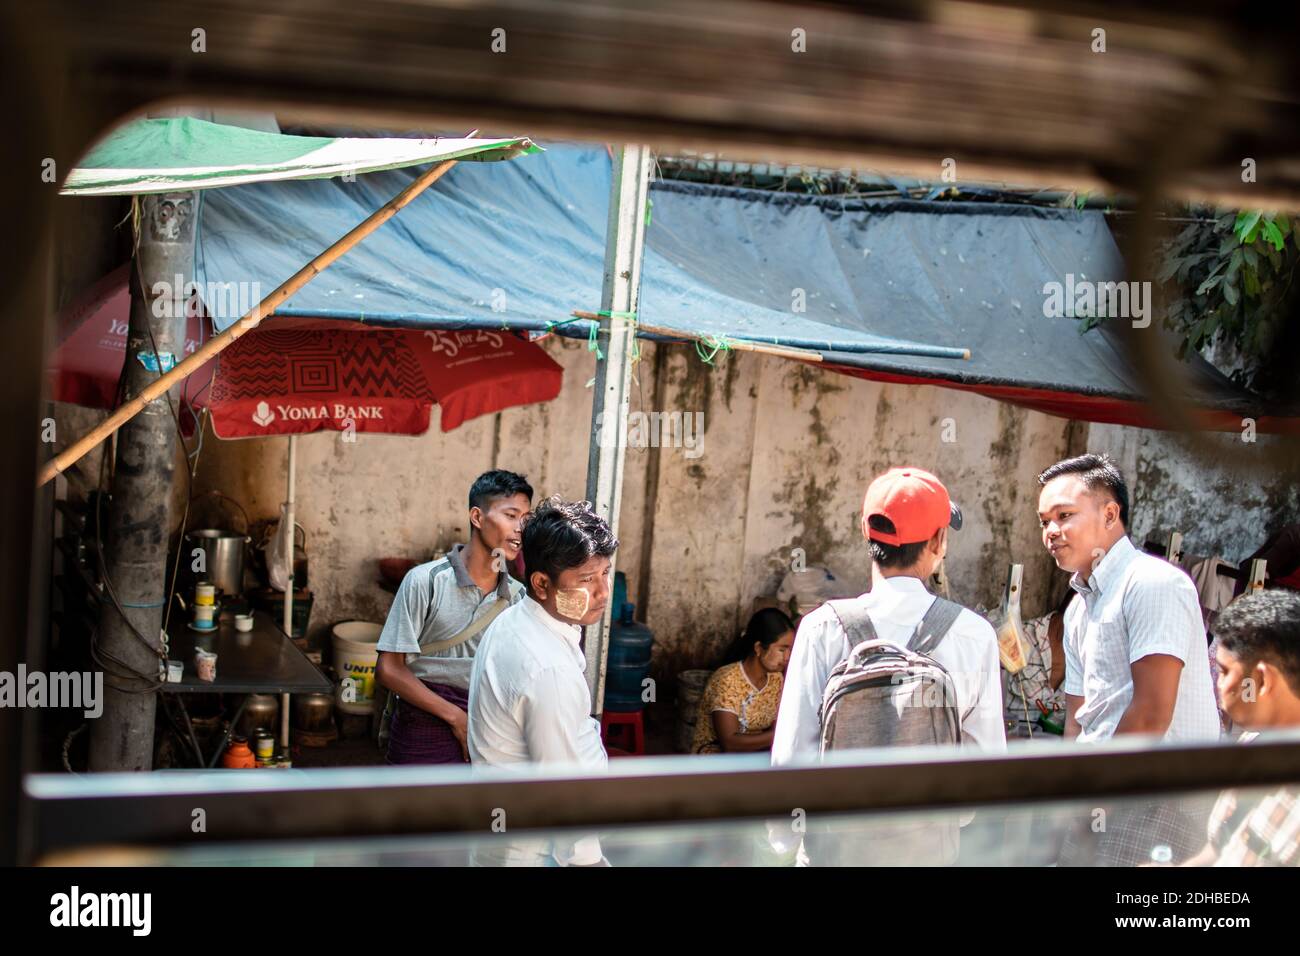 Yangon, Myanmar - December 31, 2019: Four local burmese men having a discussion outside a window of the traditional circle train in Yangon Stock Photo